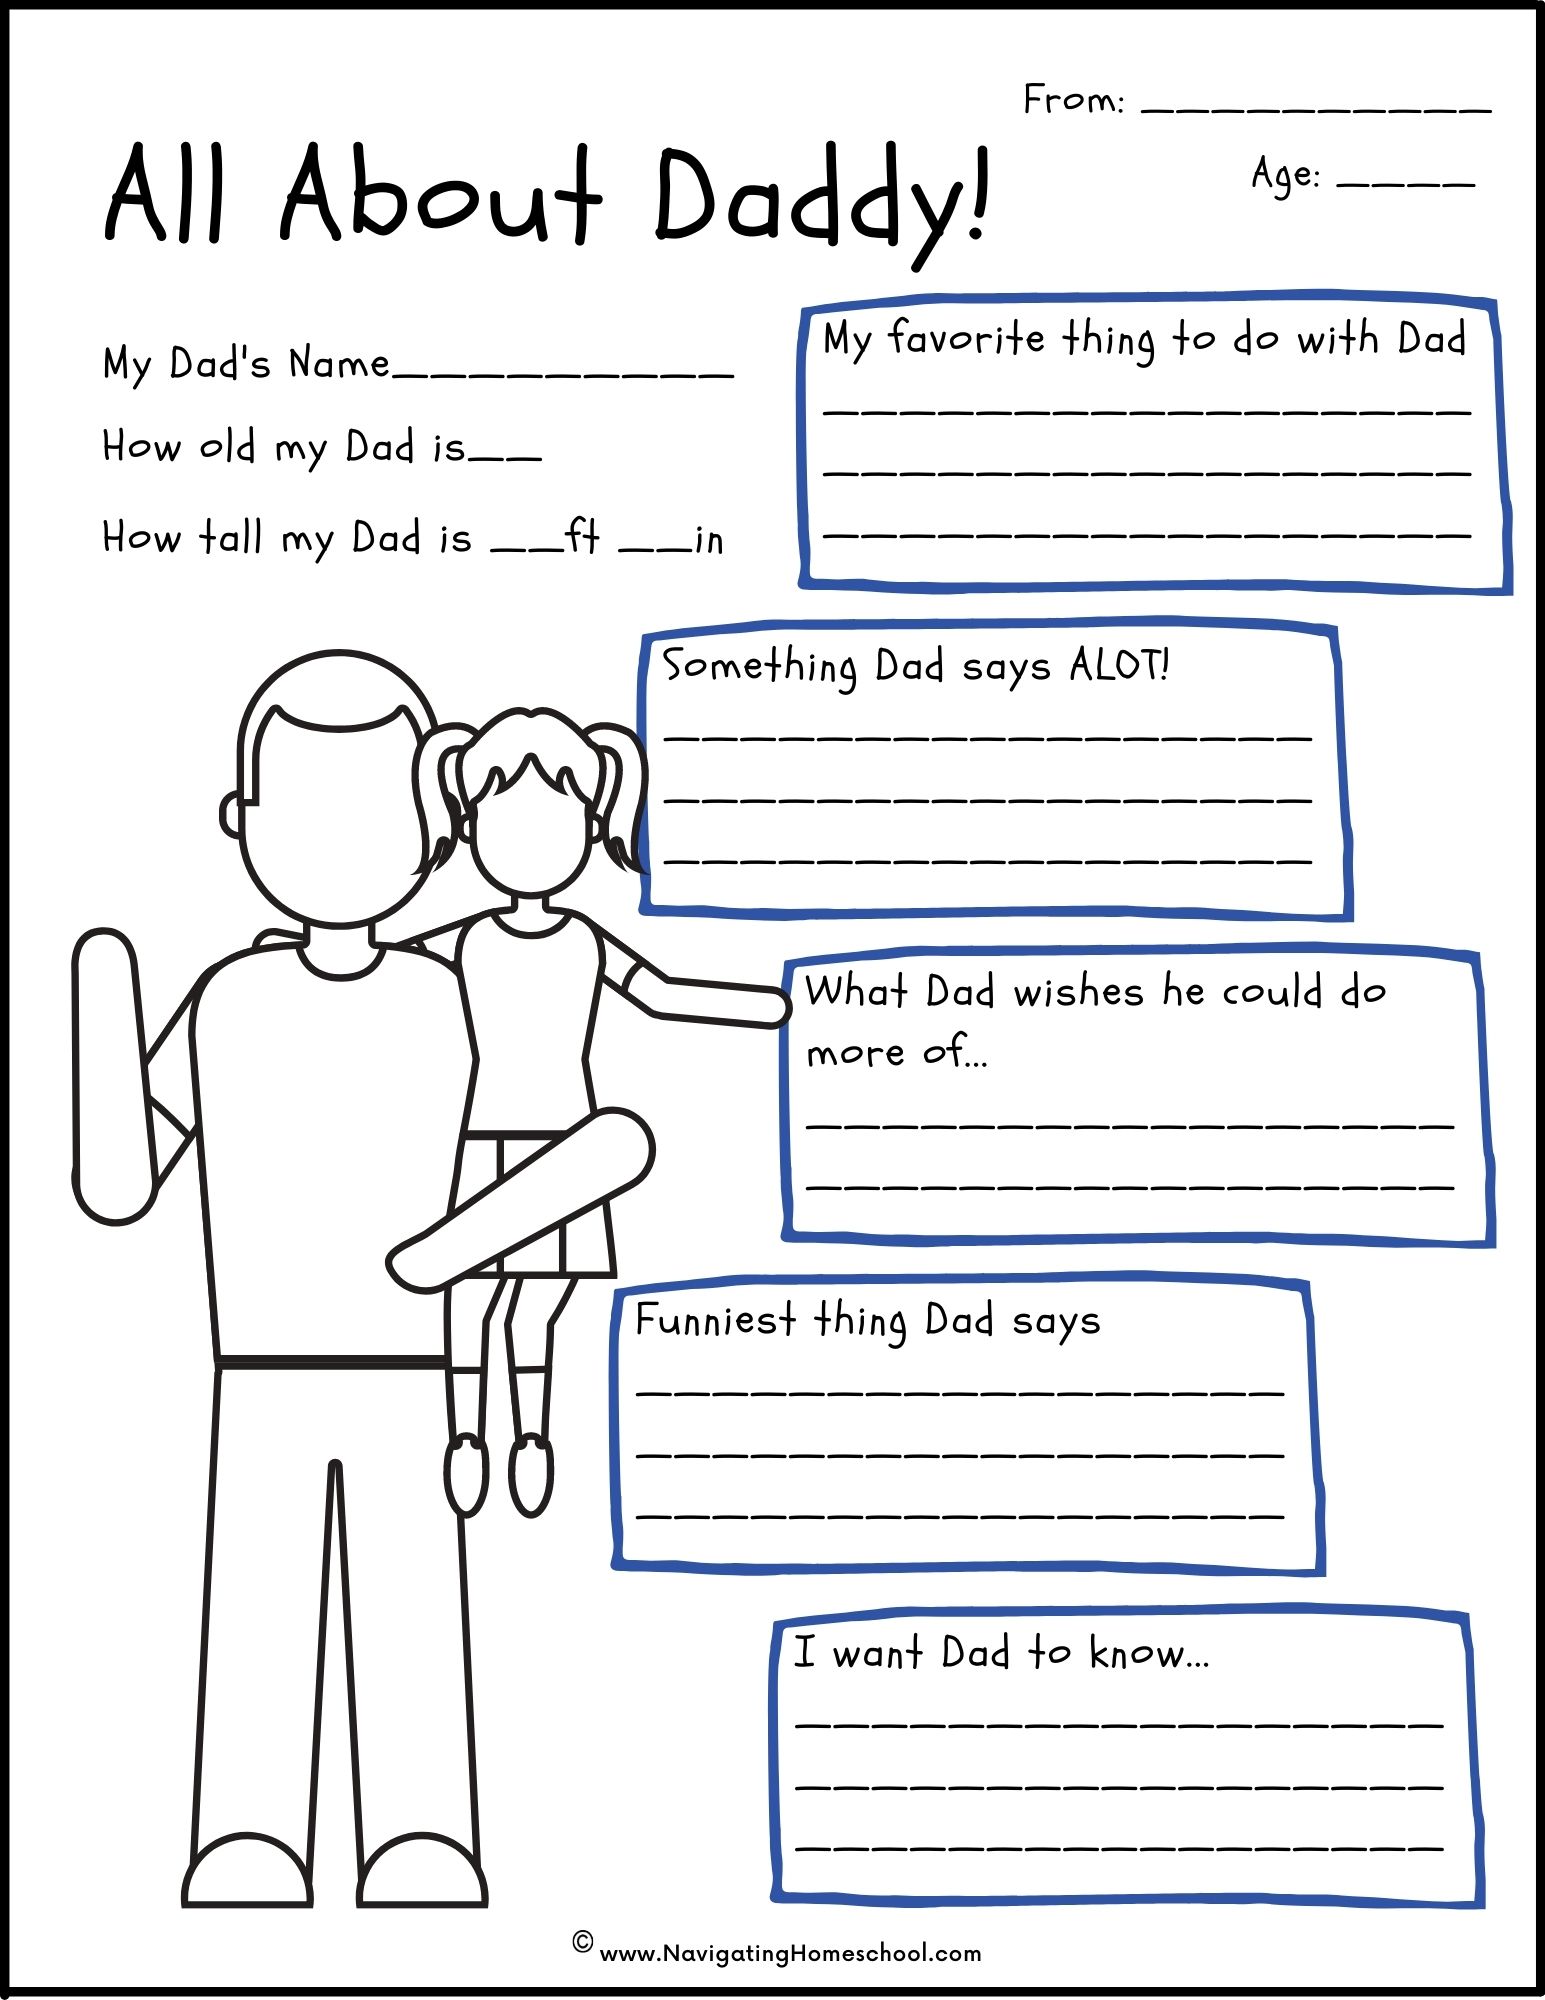 all-about-daddy-printable-free